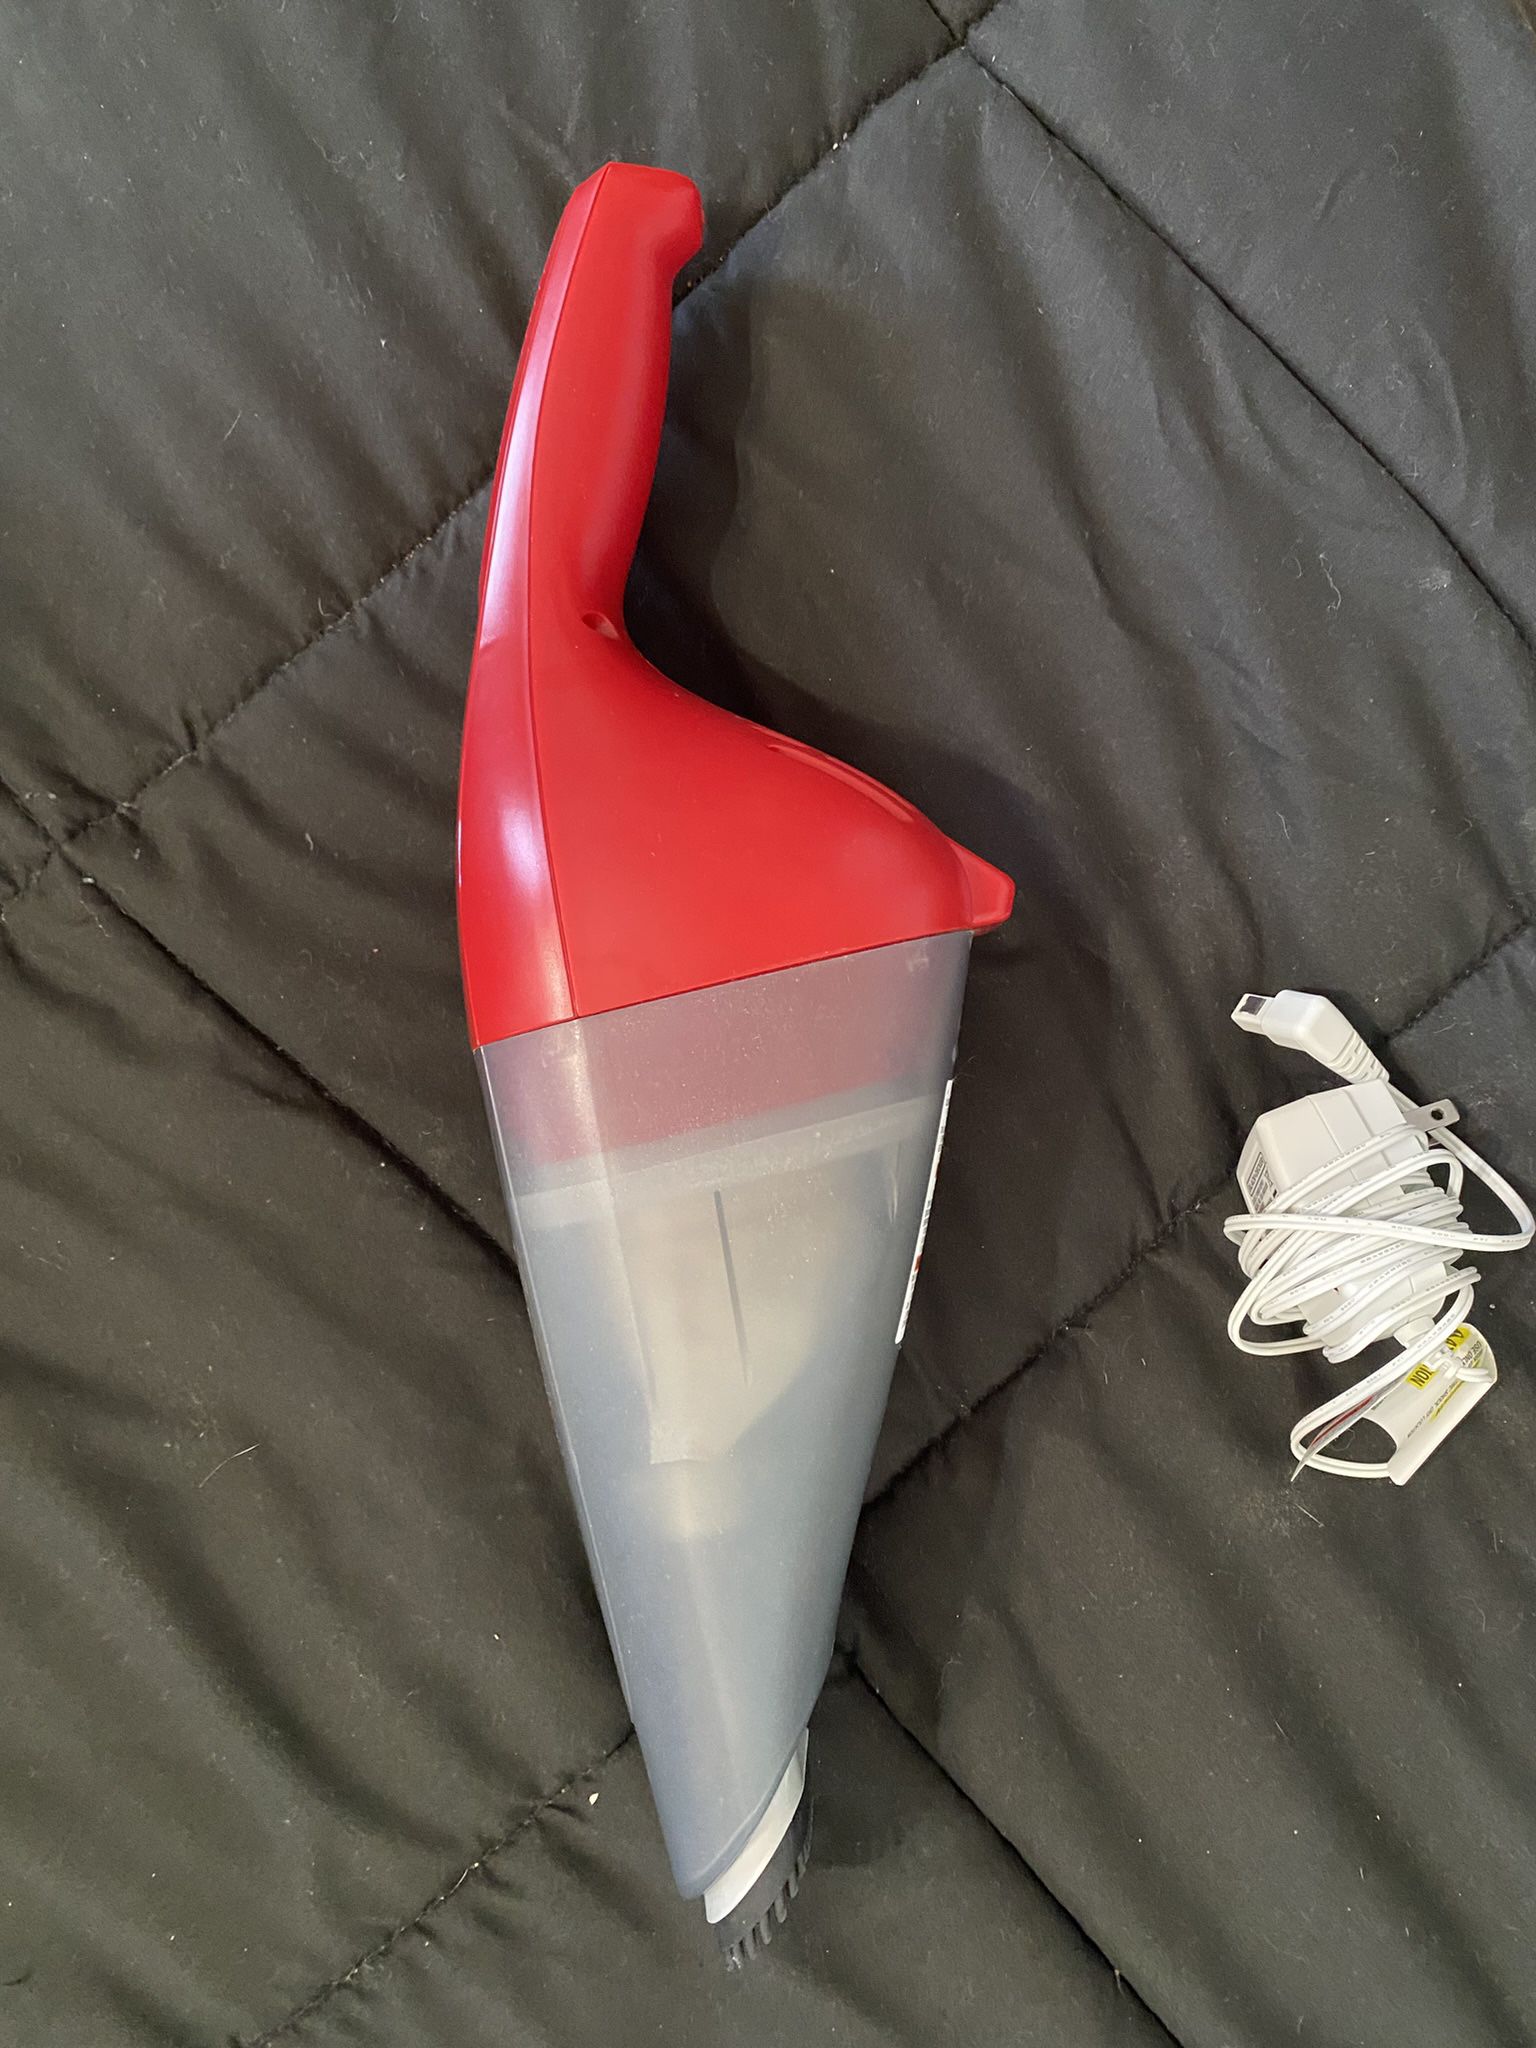 BLACK+DECKER dustbuster Handheld Vacuum, Cordless, 16V (CHV1410L) for Sale  in Los Angeles, CA - OfferUp